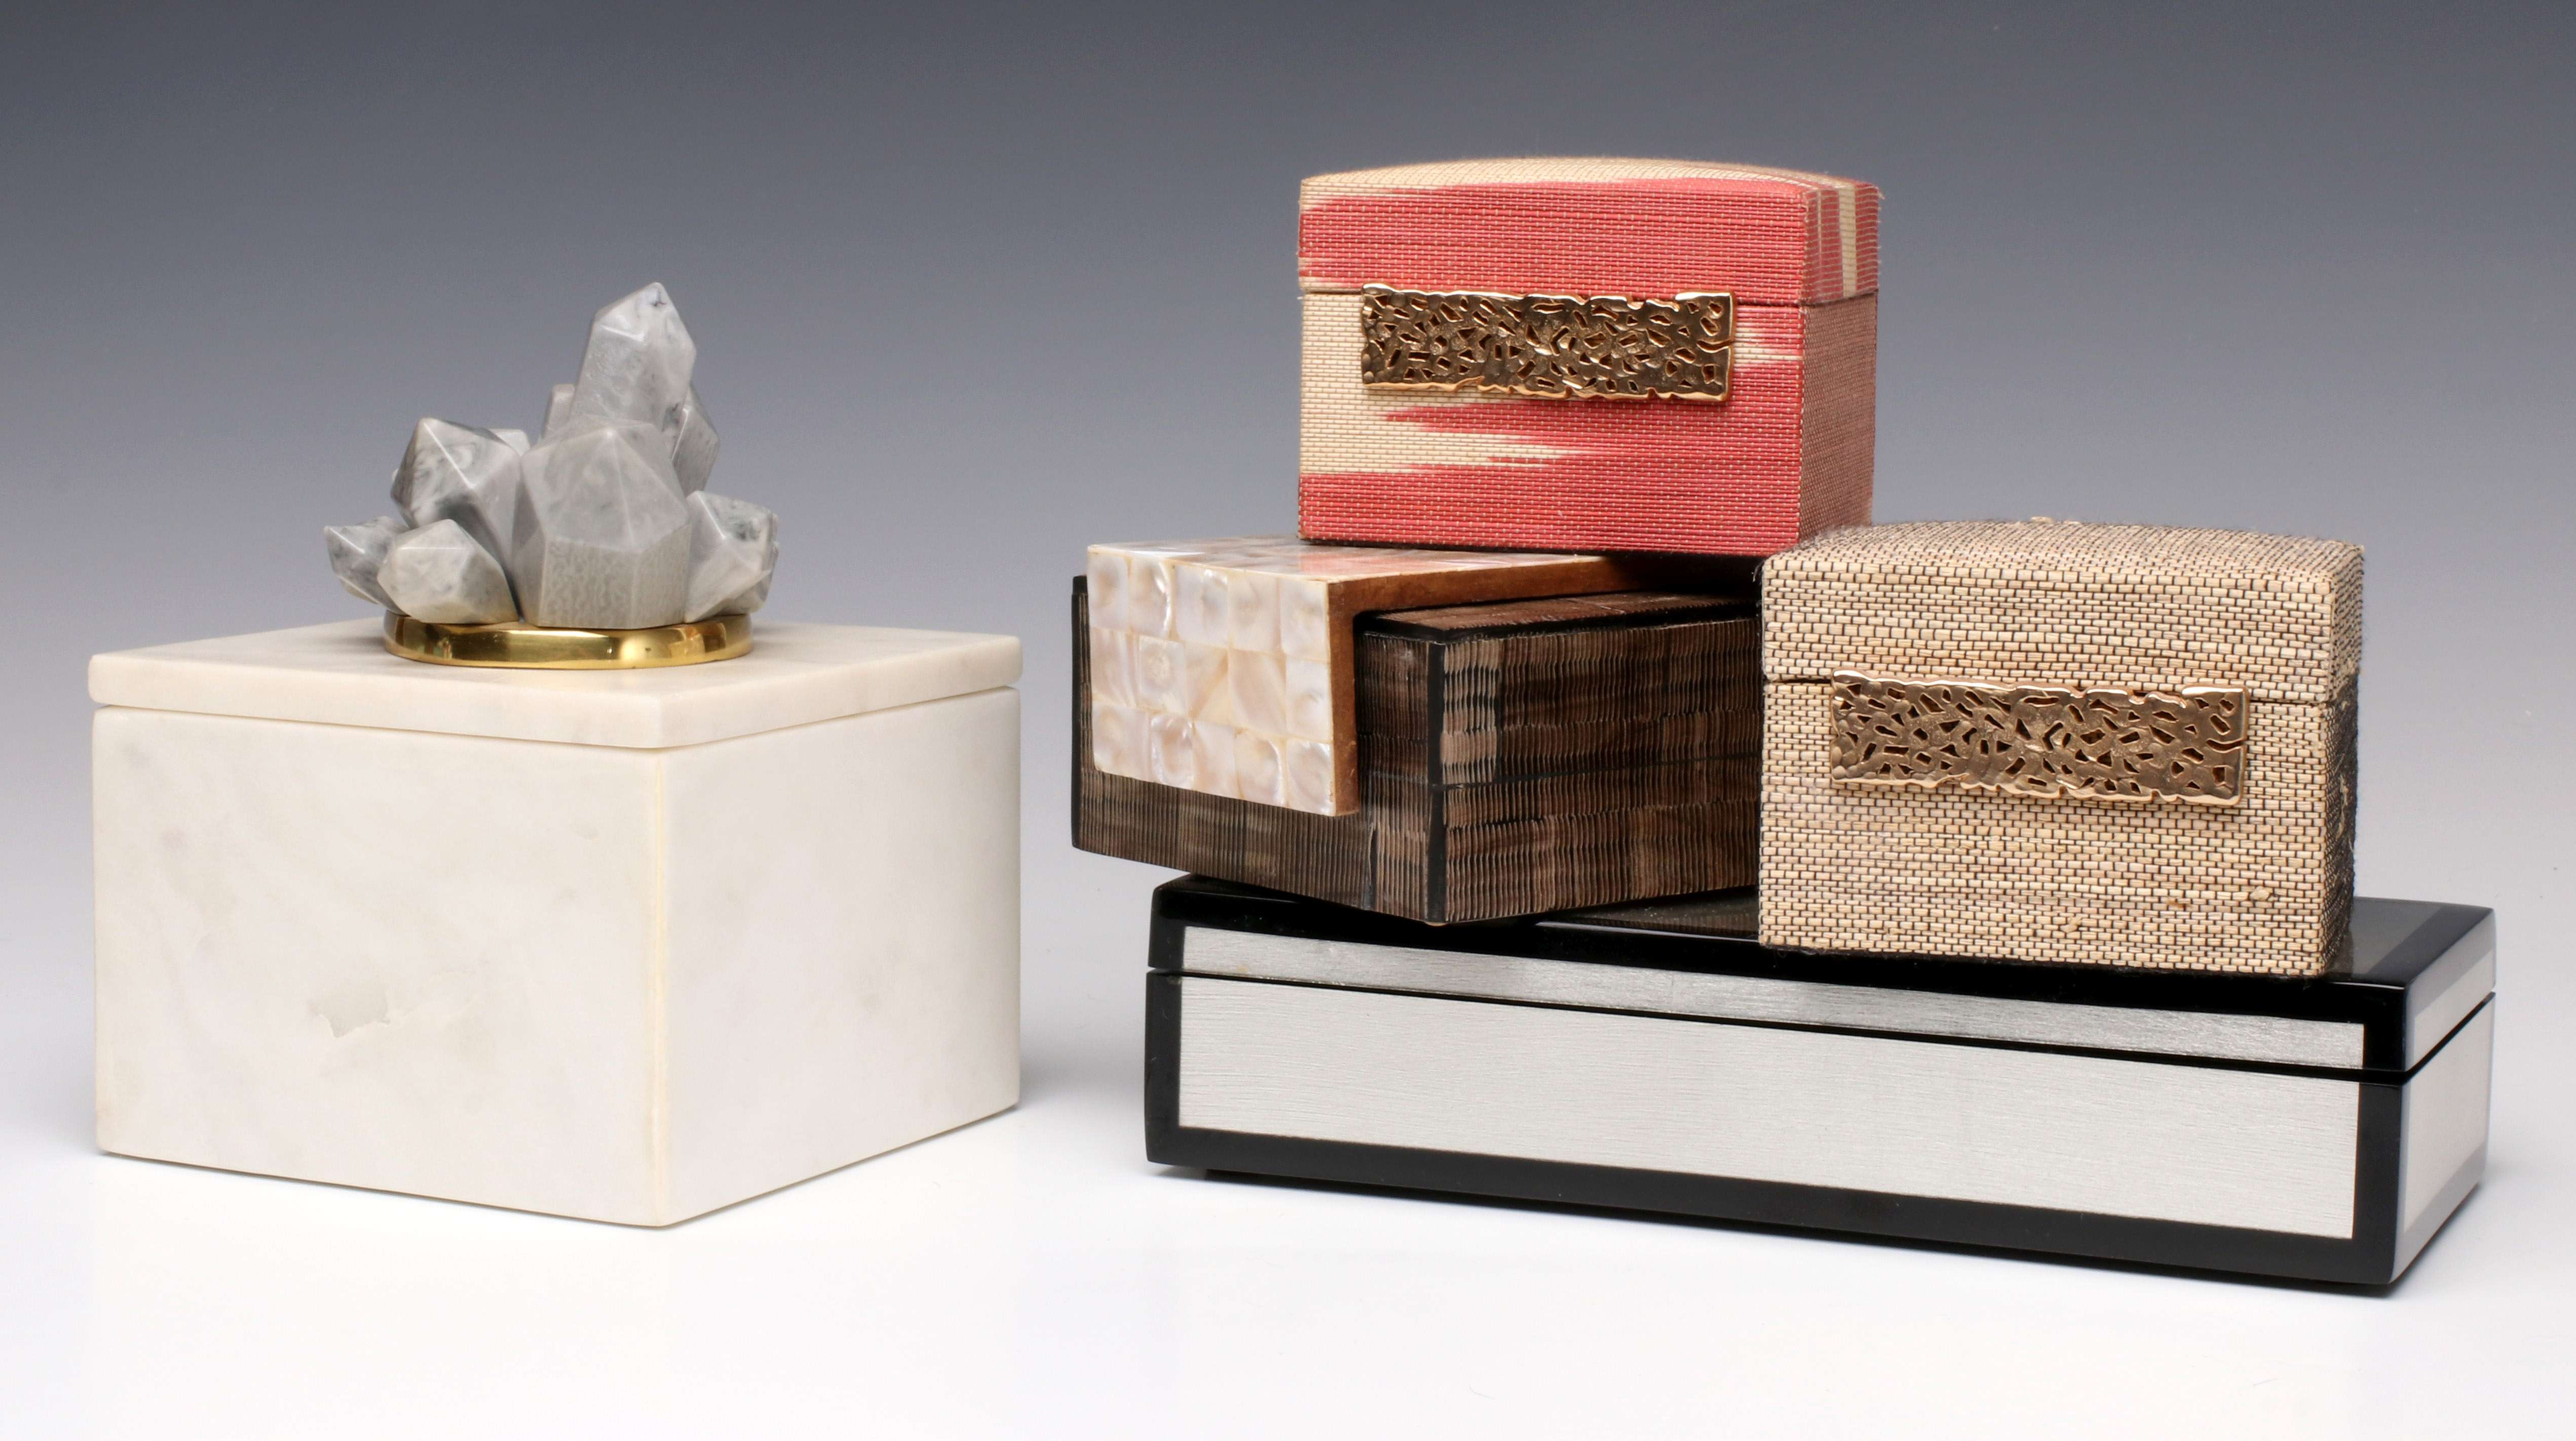 A COLLECTION OF INTERESTING ELEGANT STORAGE BOXES